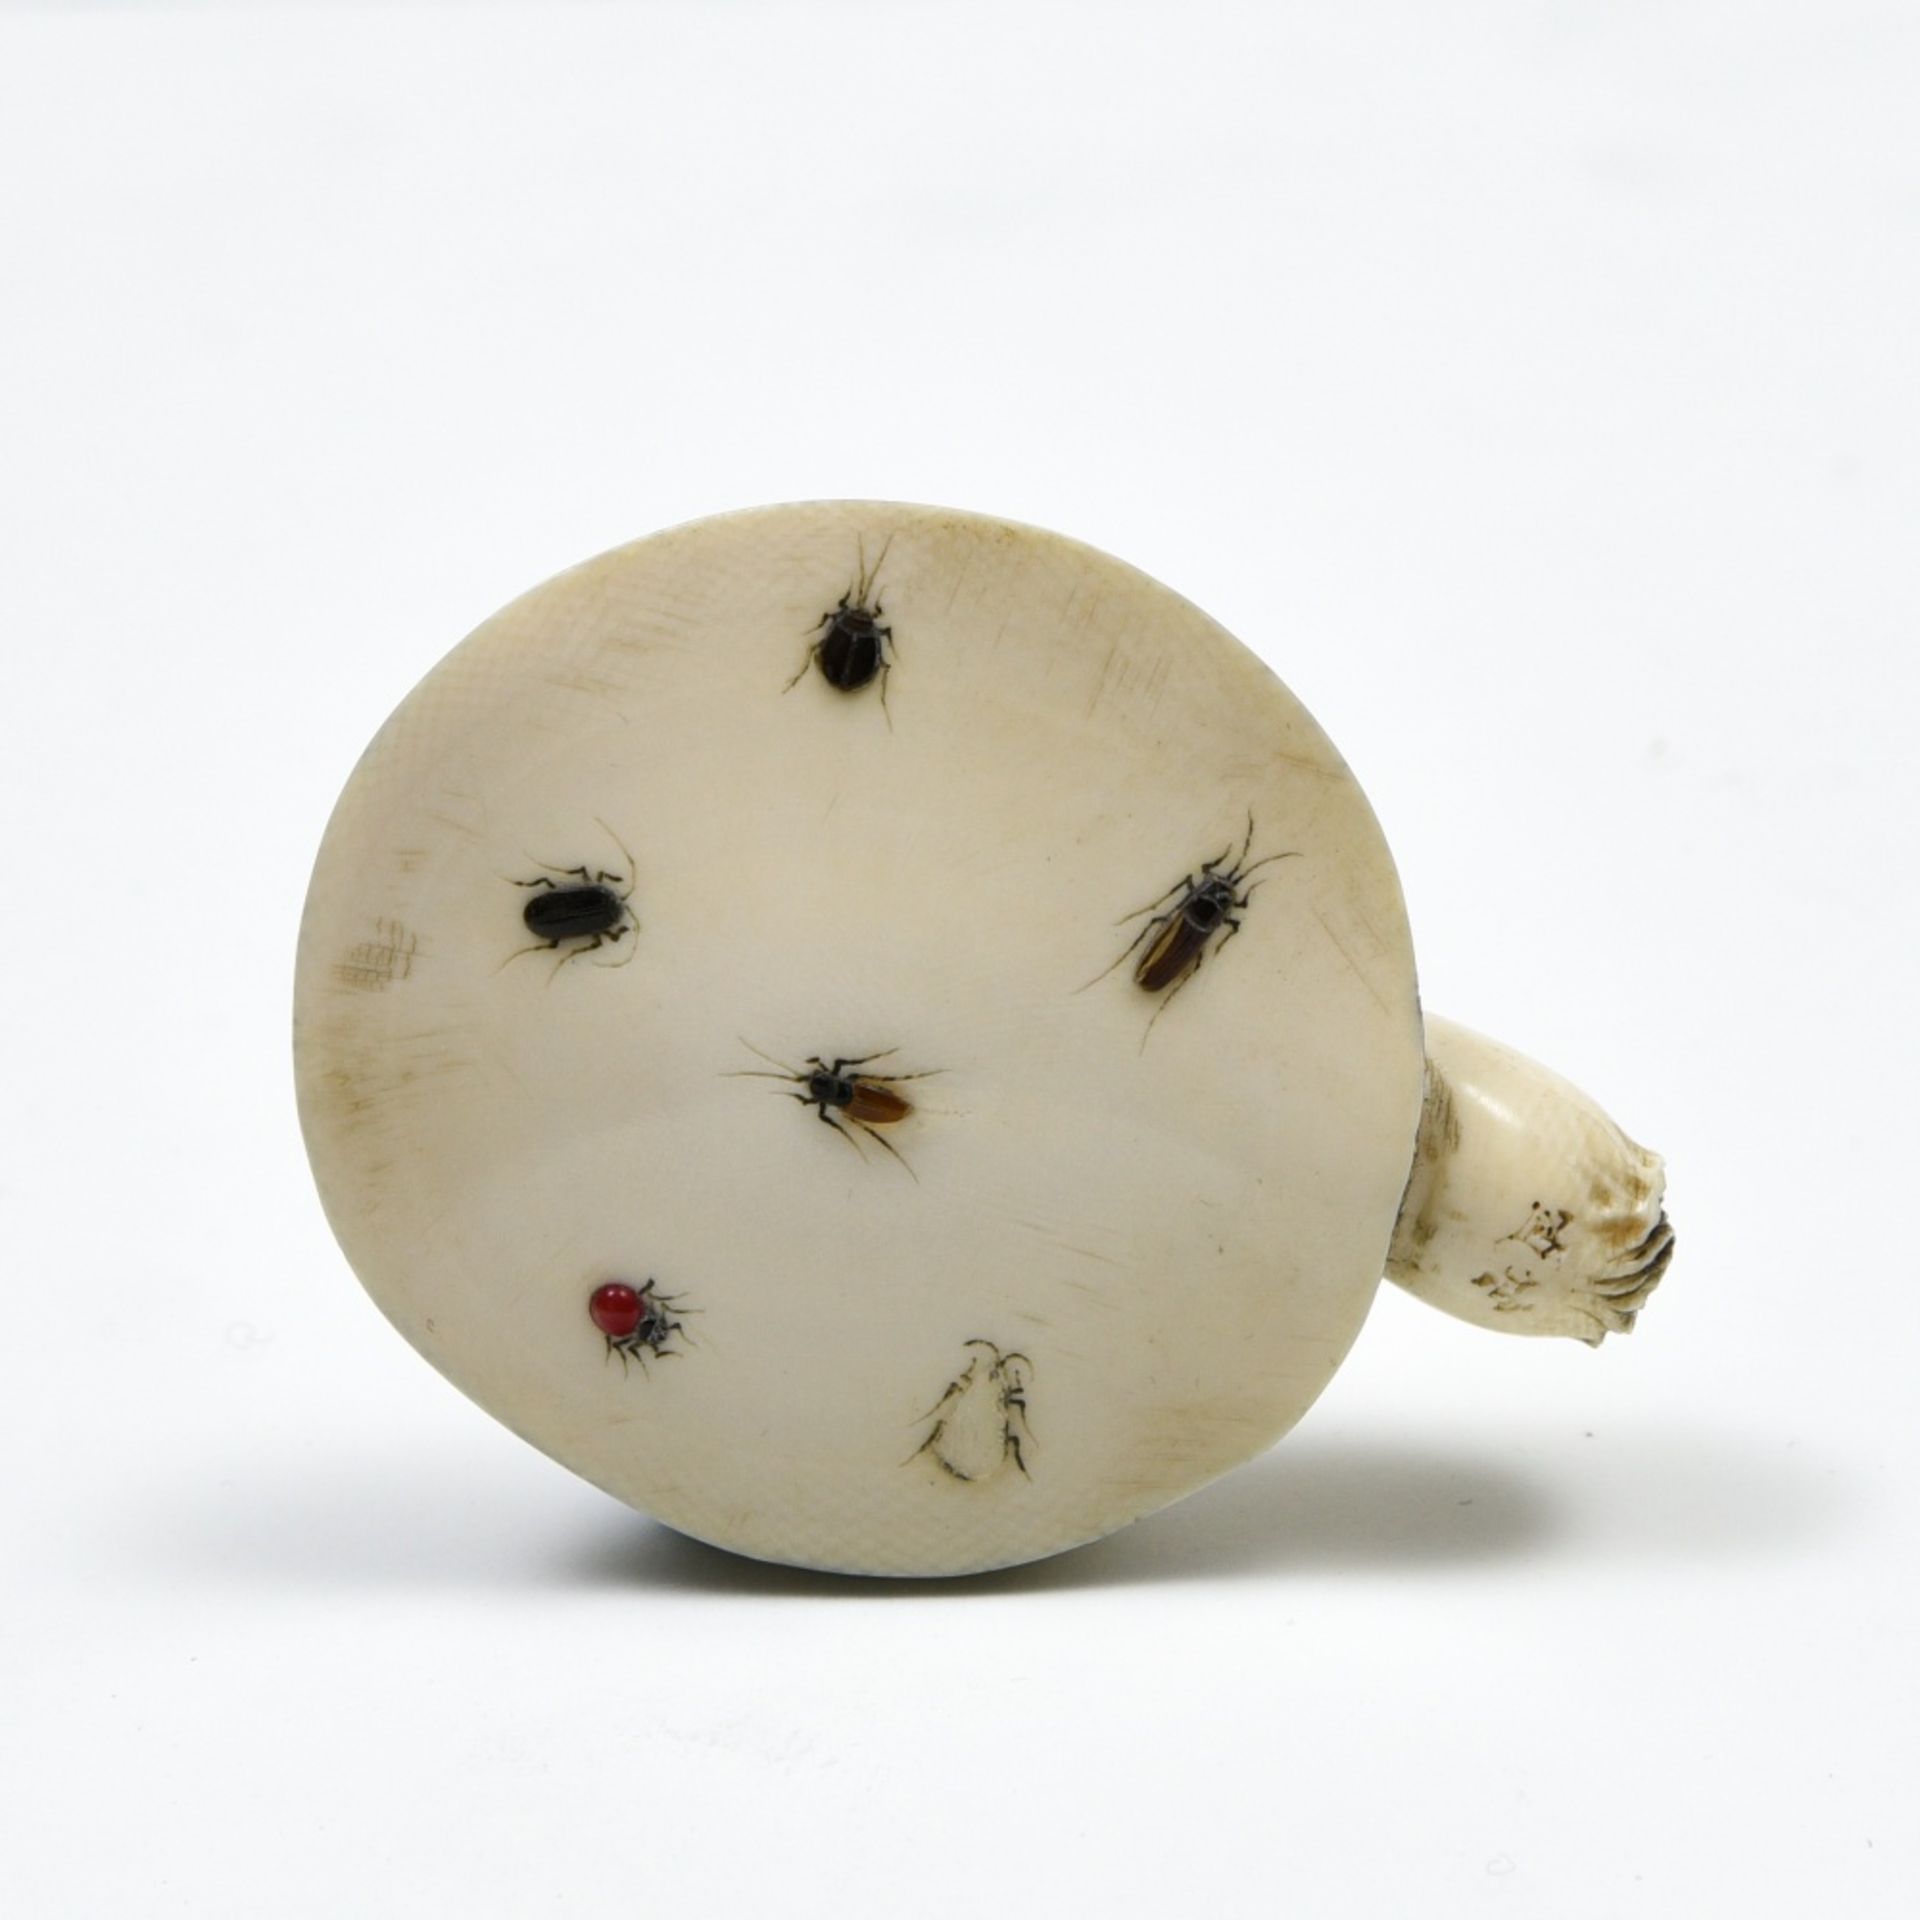 Japan, 19th century Shibayama mushroom, Carved and polished ivory with applied enamel insects. - Image 3 of 3